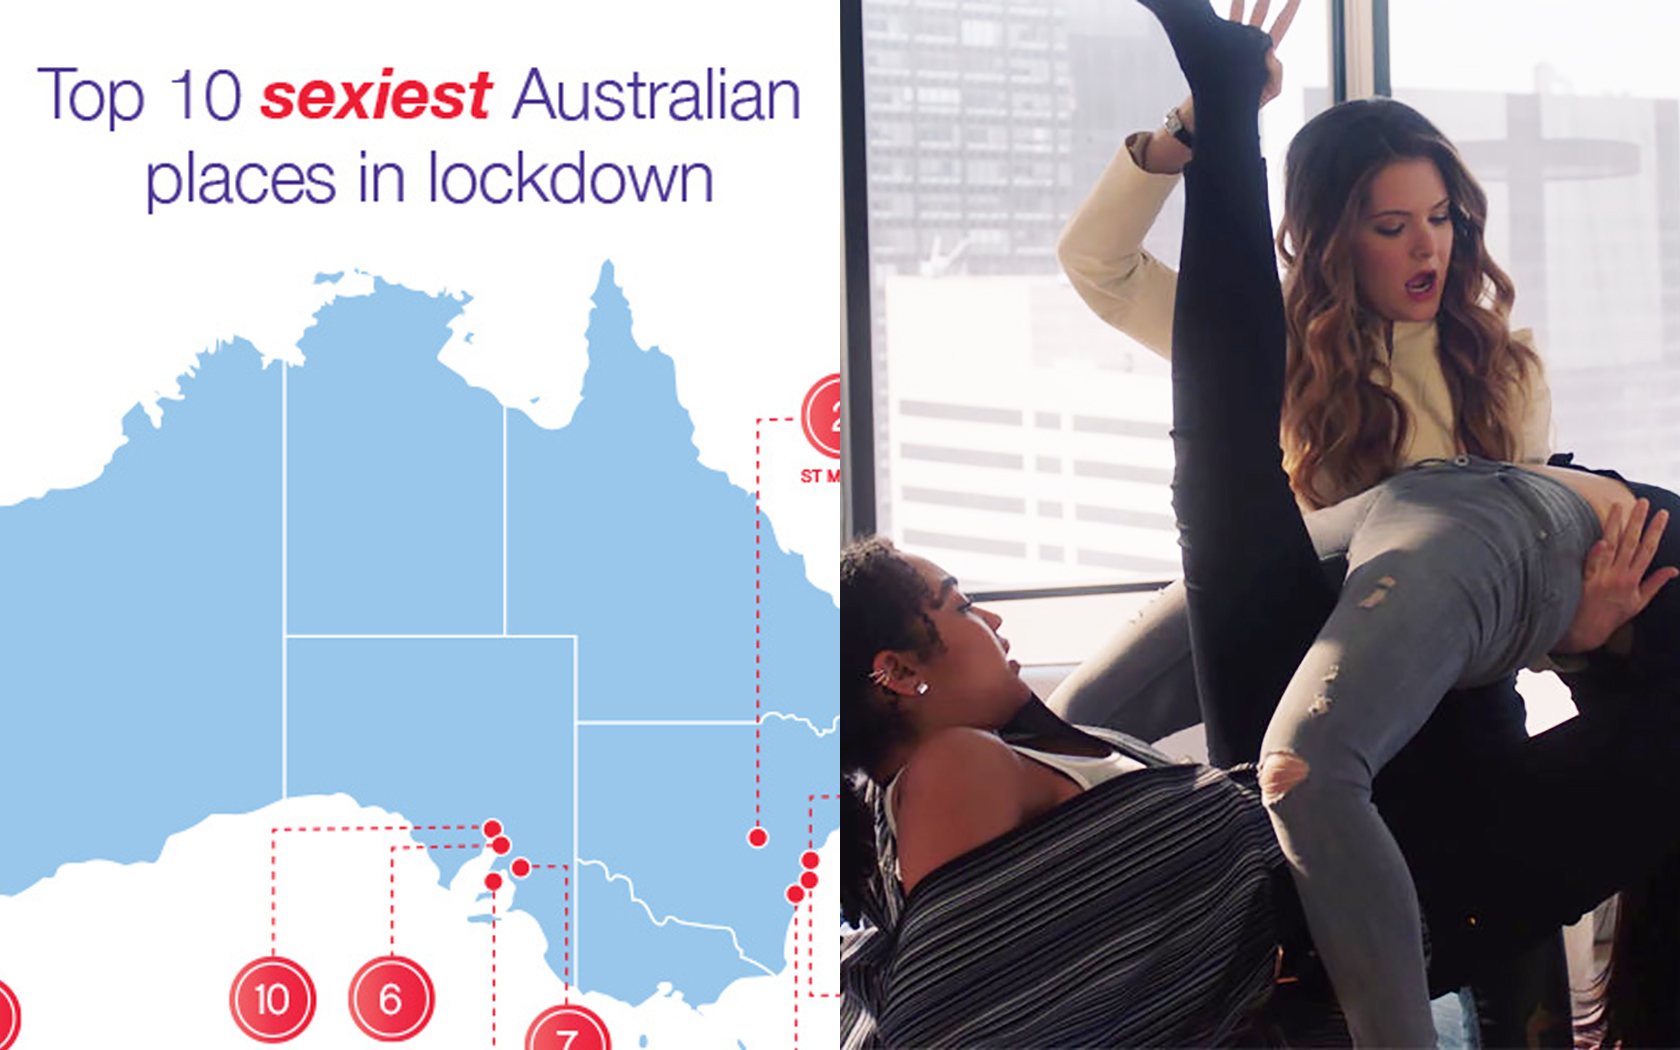 Lovehoney Sex Map revealed the sexiest cities and states in Australia for 2020.